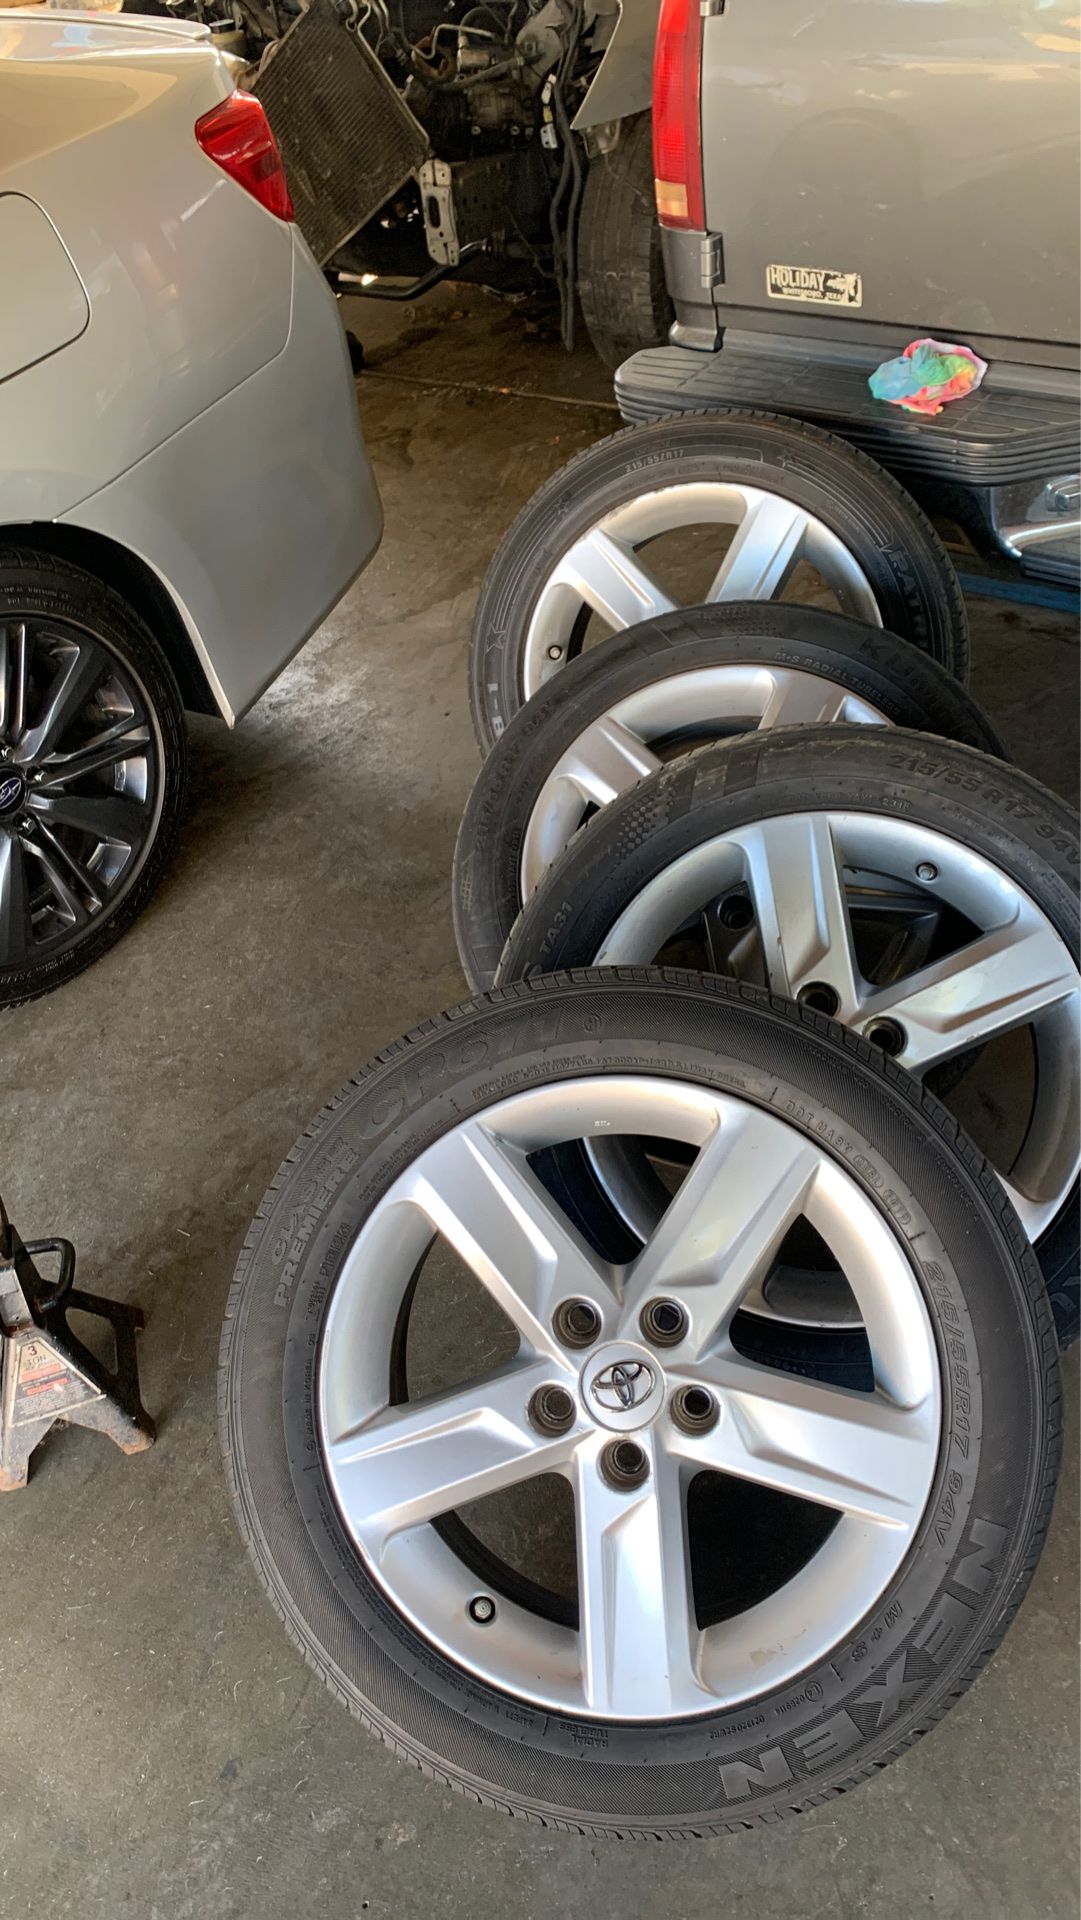 Stock Camry rims 17 inch alloy